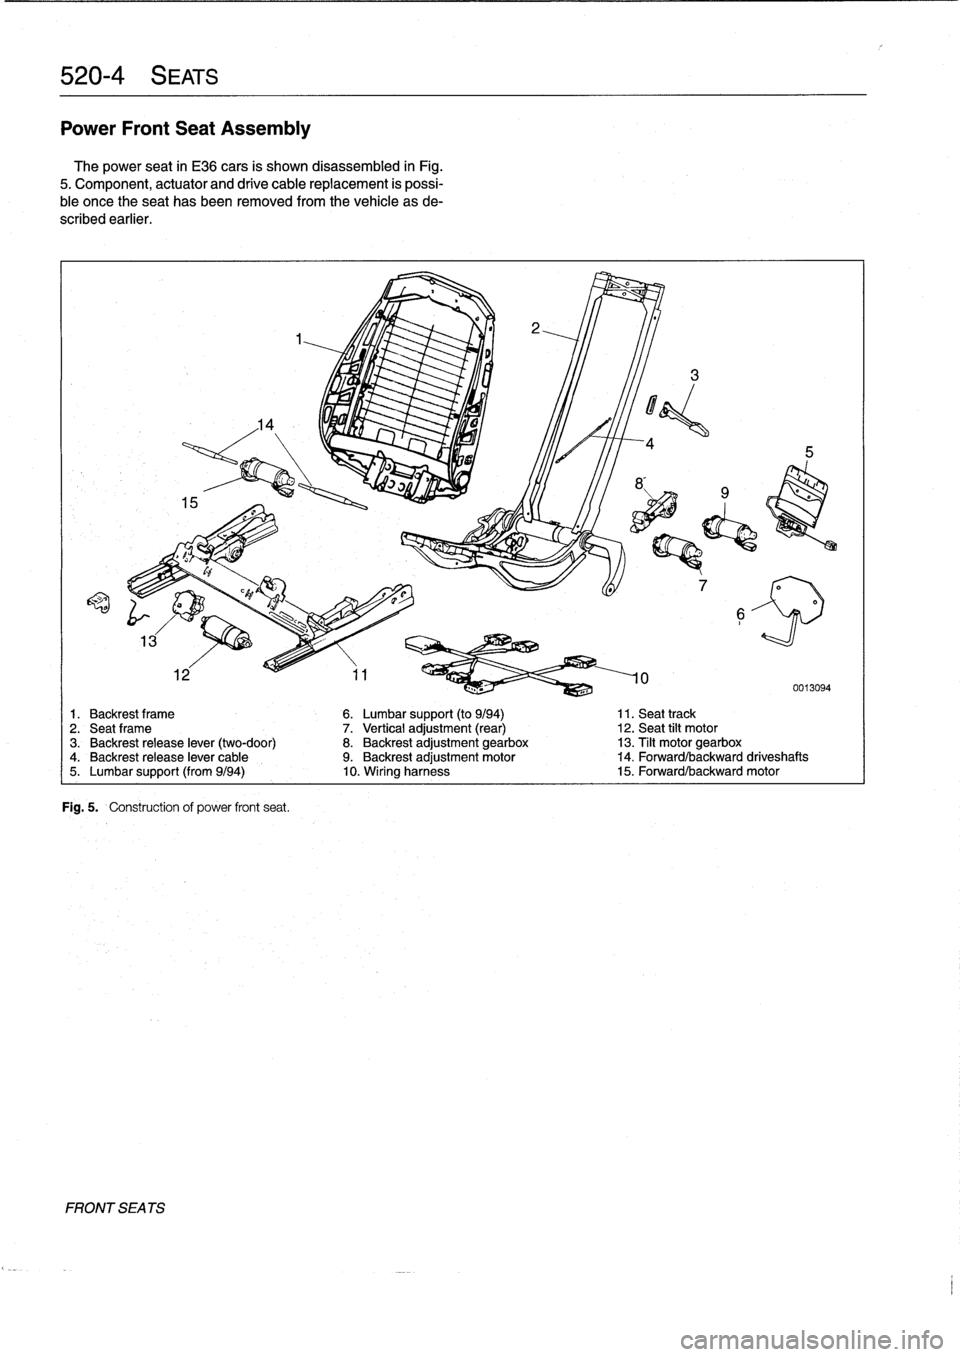 BMW M3 1996 E36 Workshop Manual 
520-
4
SEATS

Power
Front
Seat
Assembly
The
power
seat
in
E36
cars
is
shown
disassembled
in
Fig
.

5
.
Component,
actuator
and
drive
cable
replacement
is
possi-
ble
once
theseat
has
been
removed
from